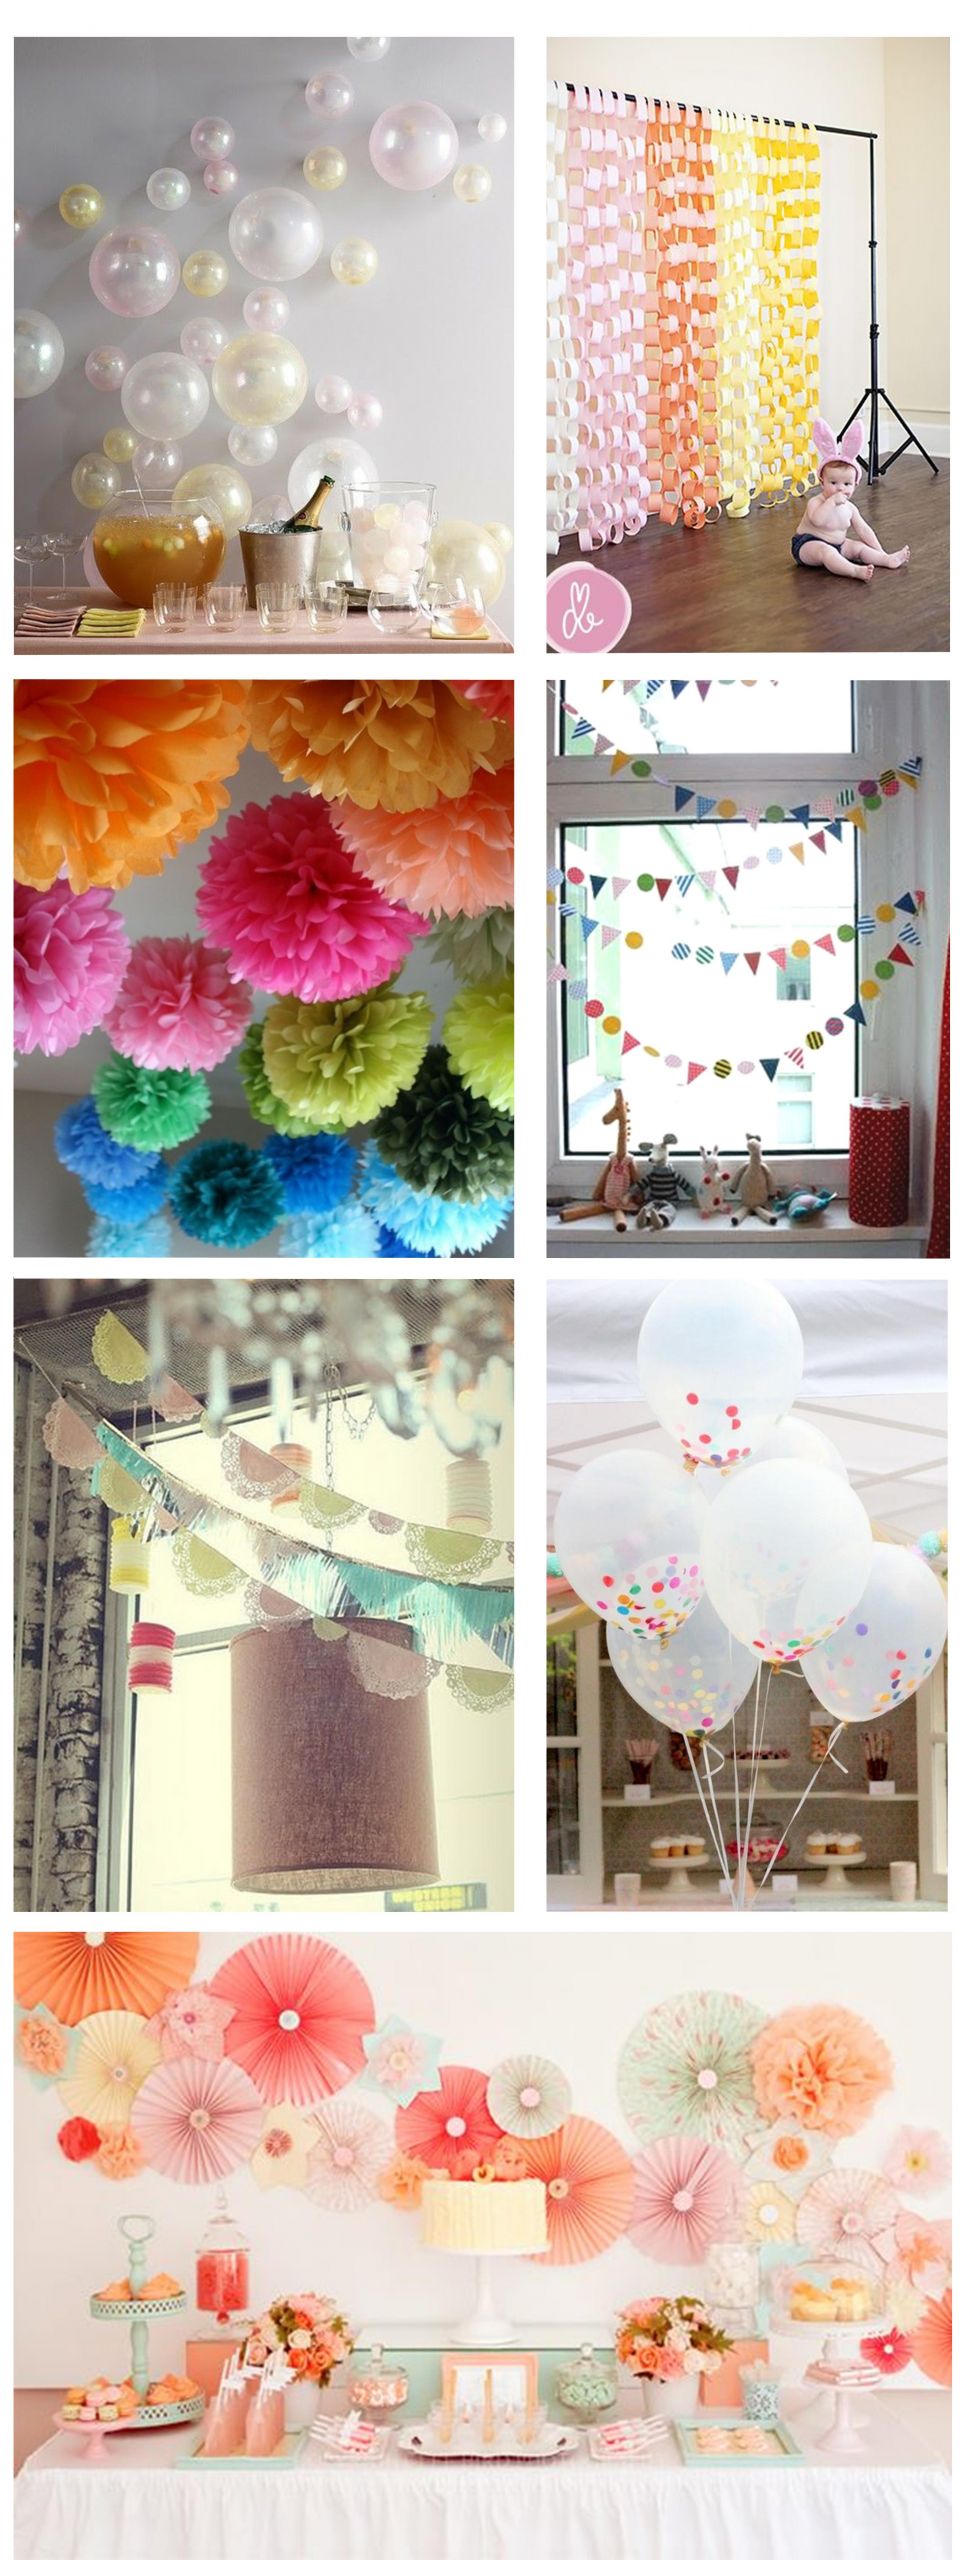 Party Decoration DIY
 Ideas for home made party decorations